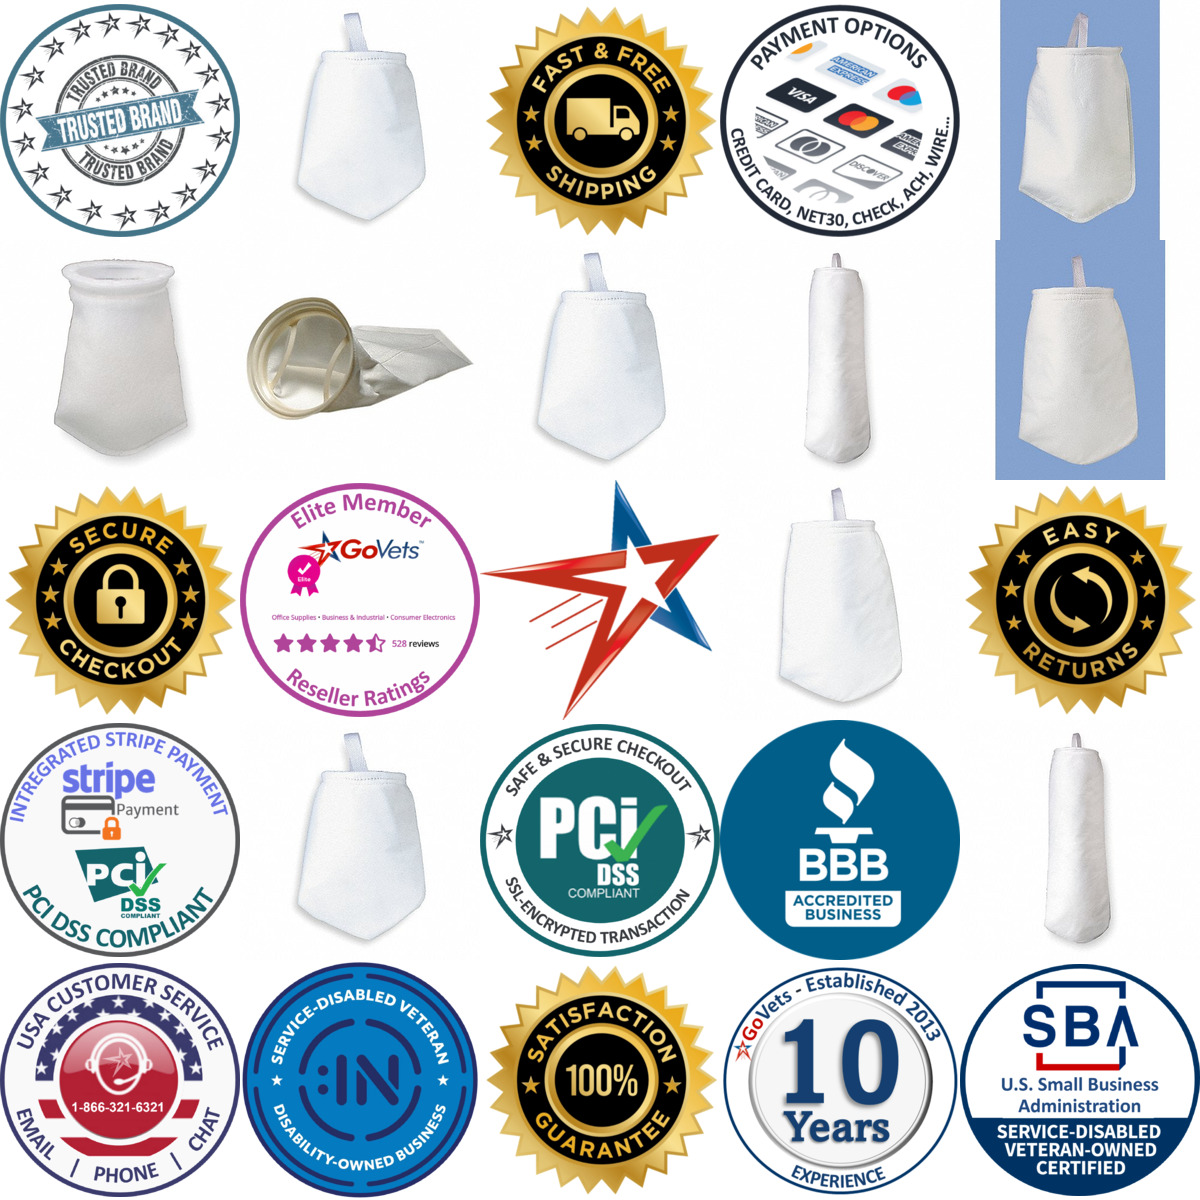 A selection of Filter Bags products on GoVets